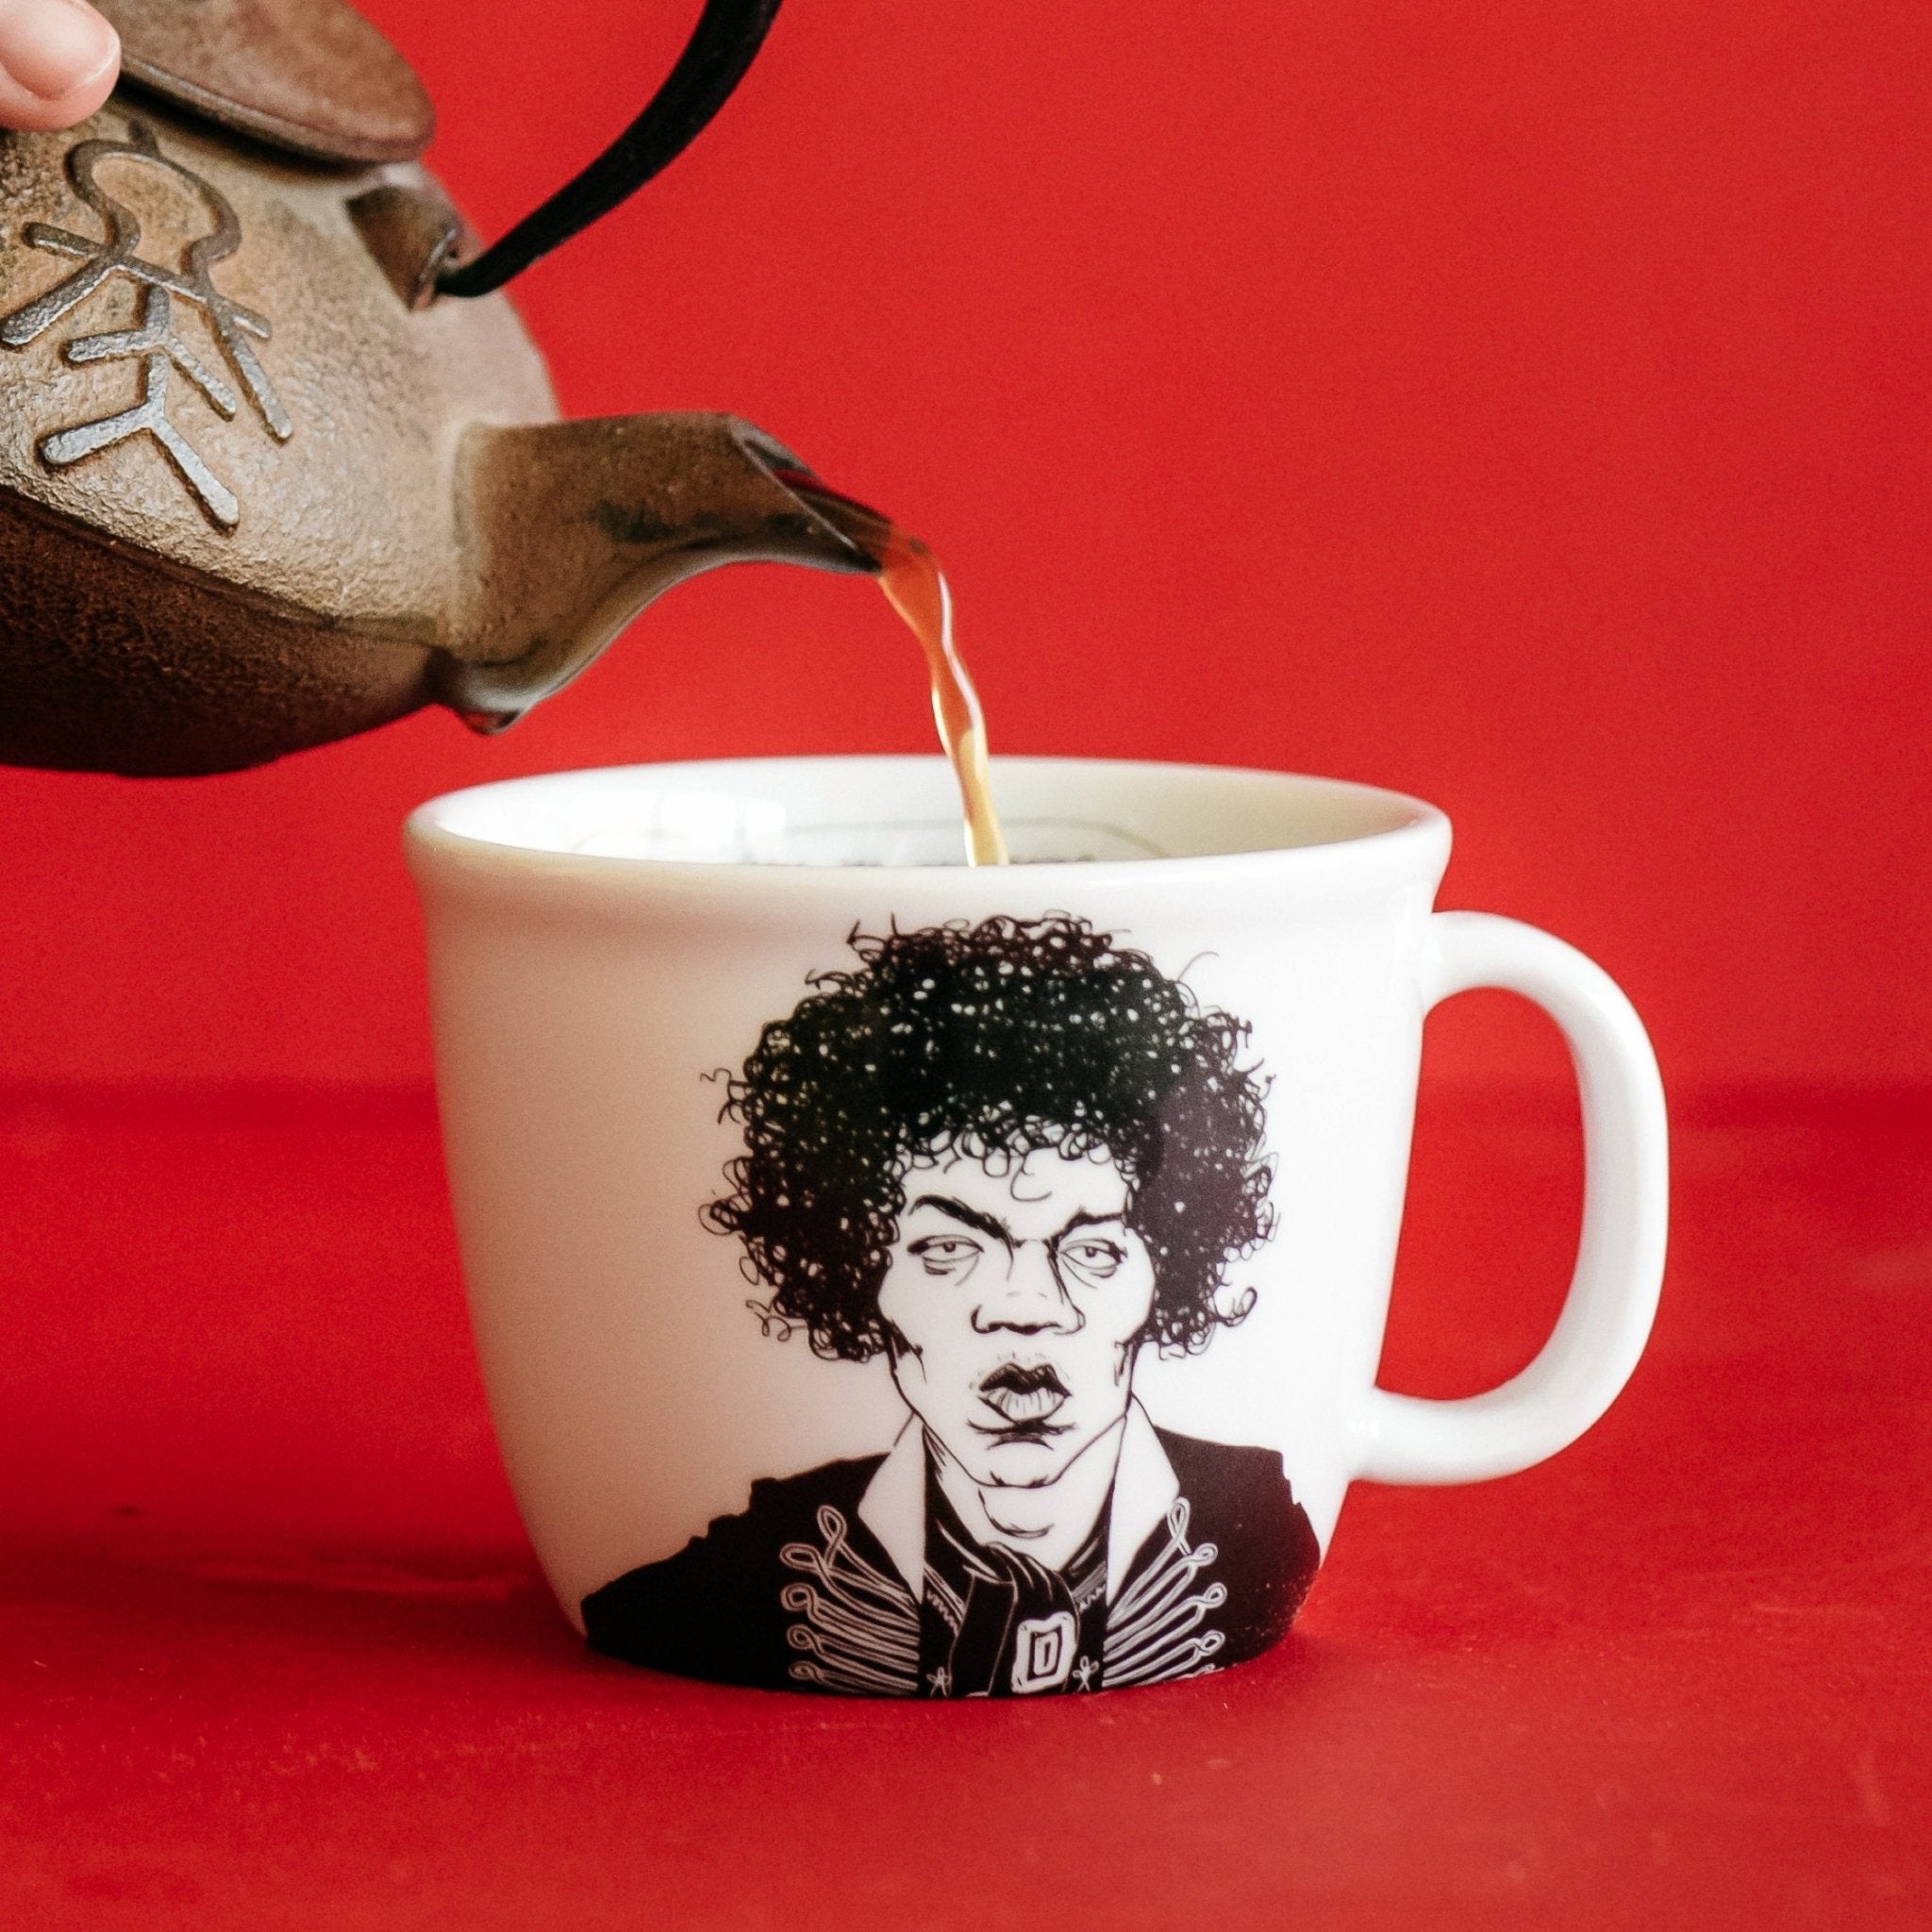 Porcelain cup inspired by Jimi Hendrix with tea